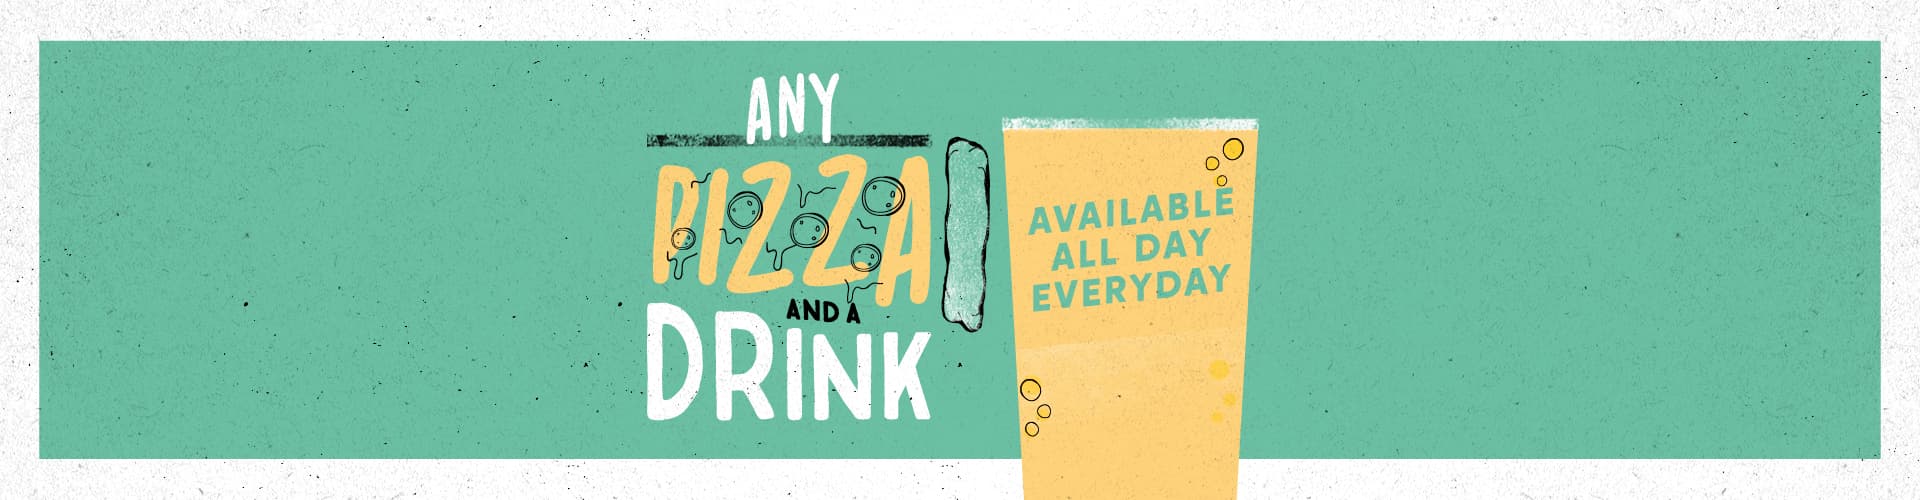 Pizza and a Drink - Available All Day, Everyday